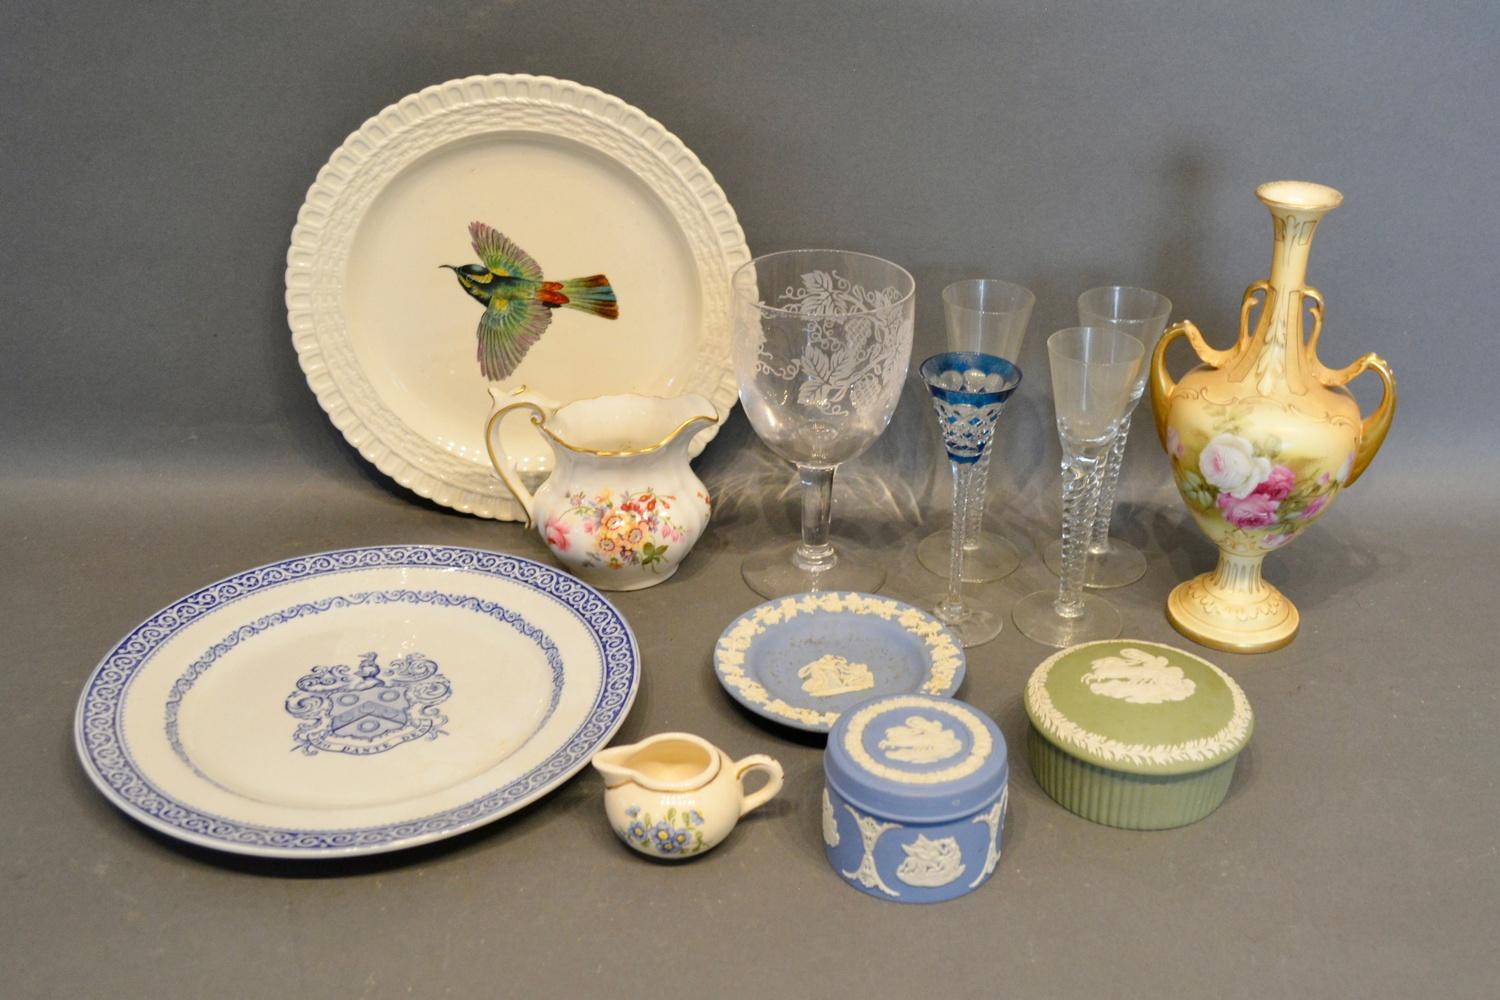 A Copeland Spode Ribbon Plate decorated with a kingfisher, together with various ceramics and